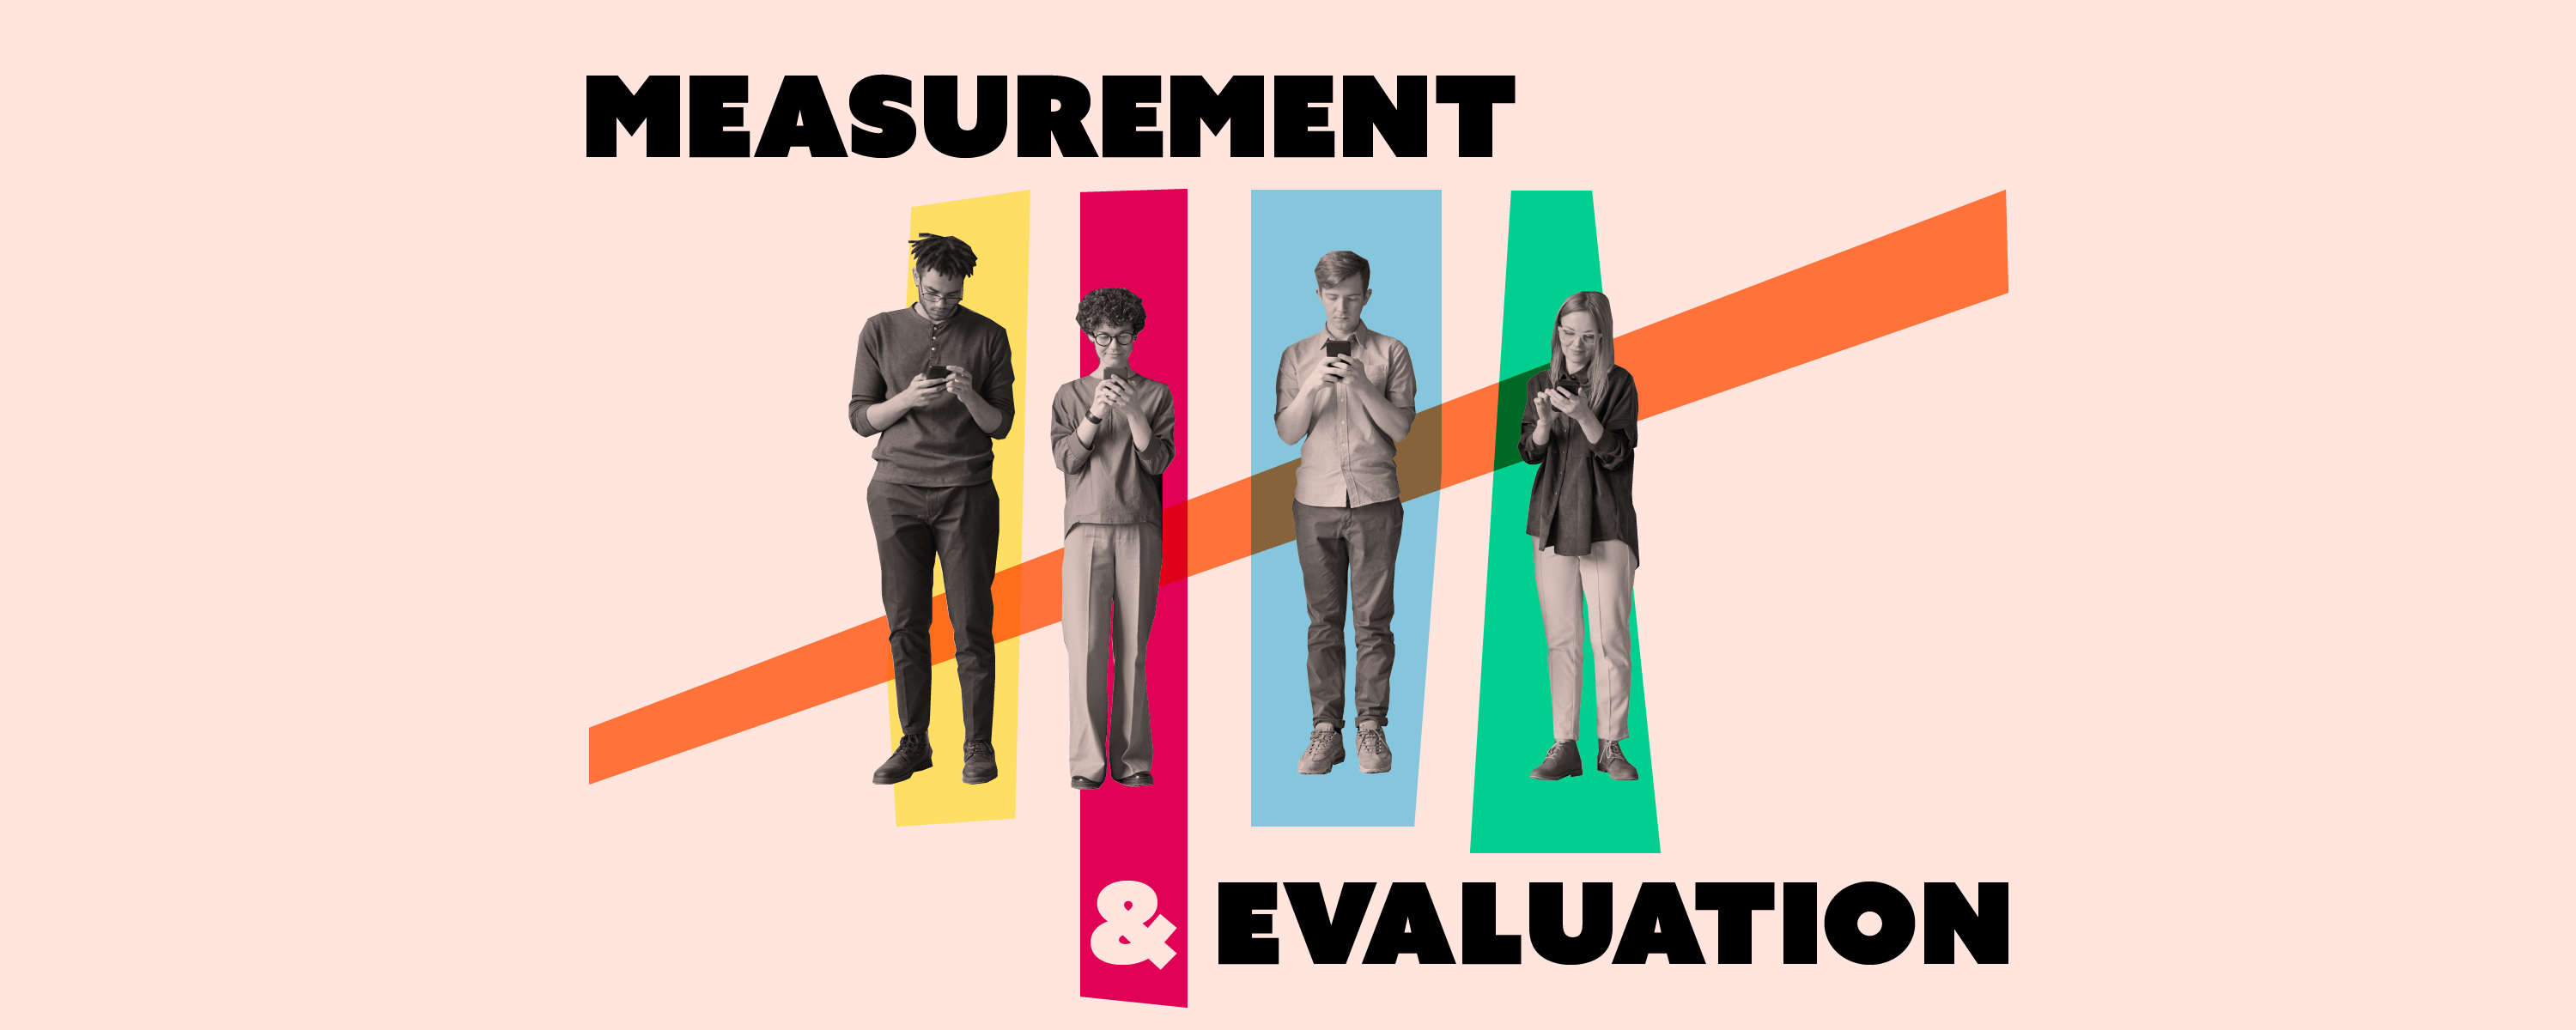 Measurement and evaluation